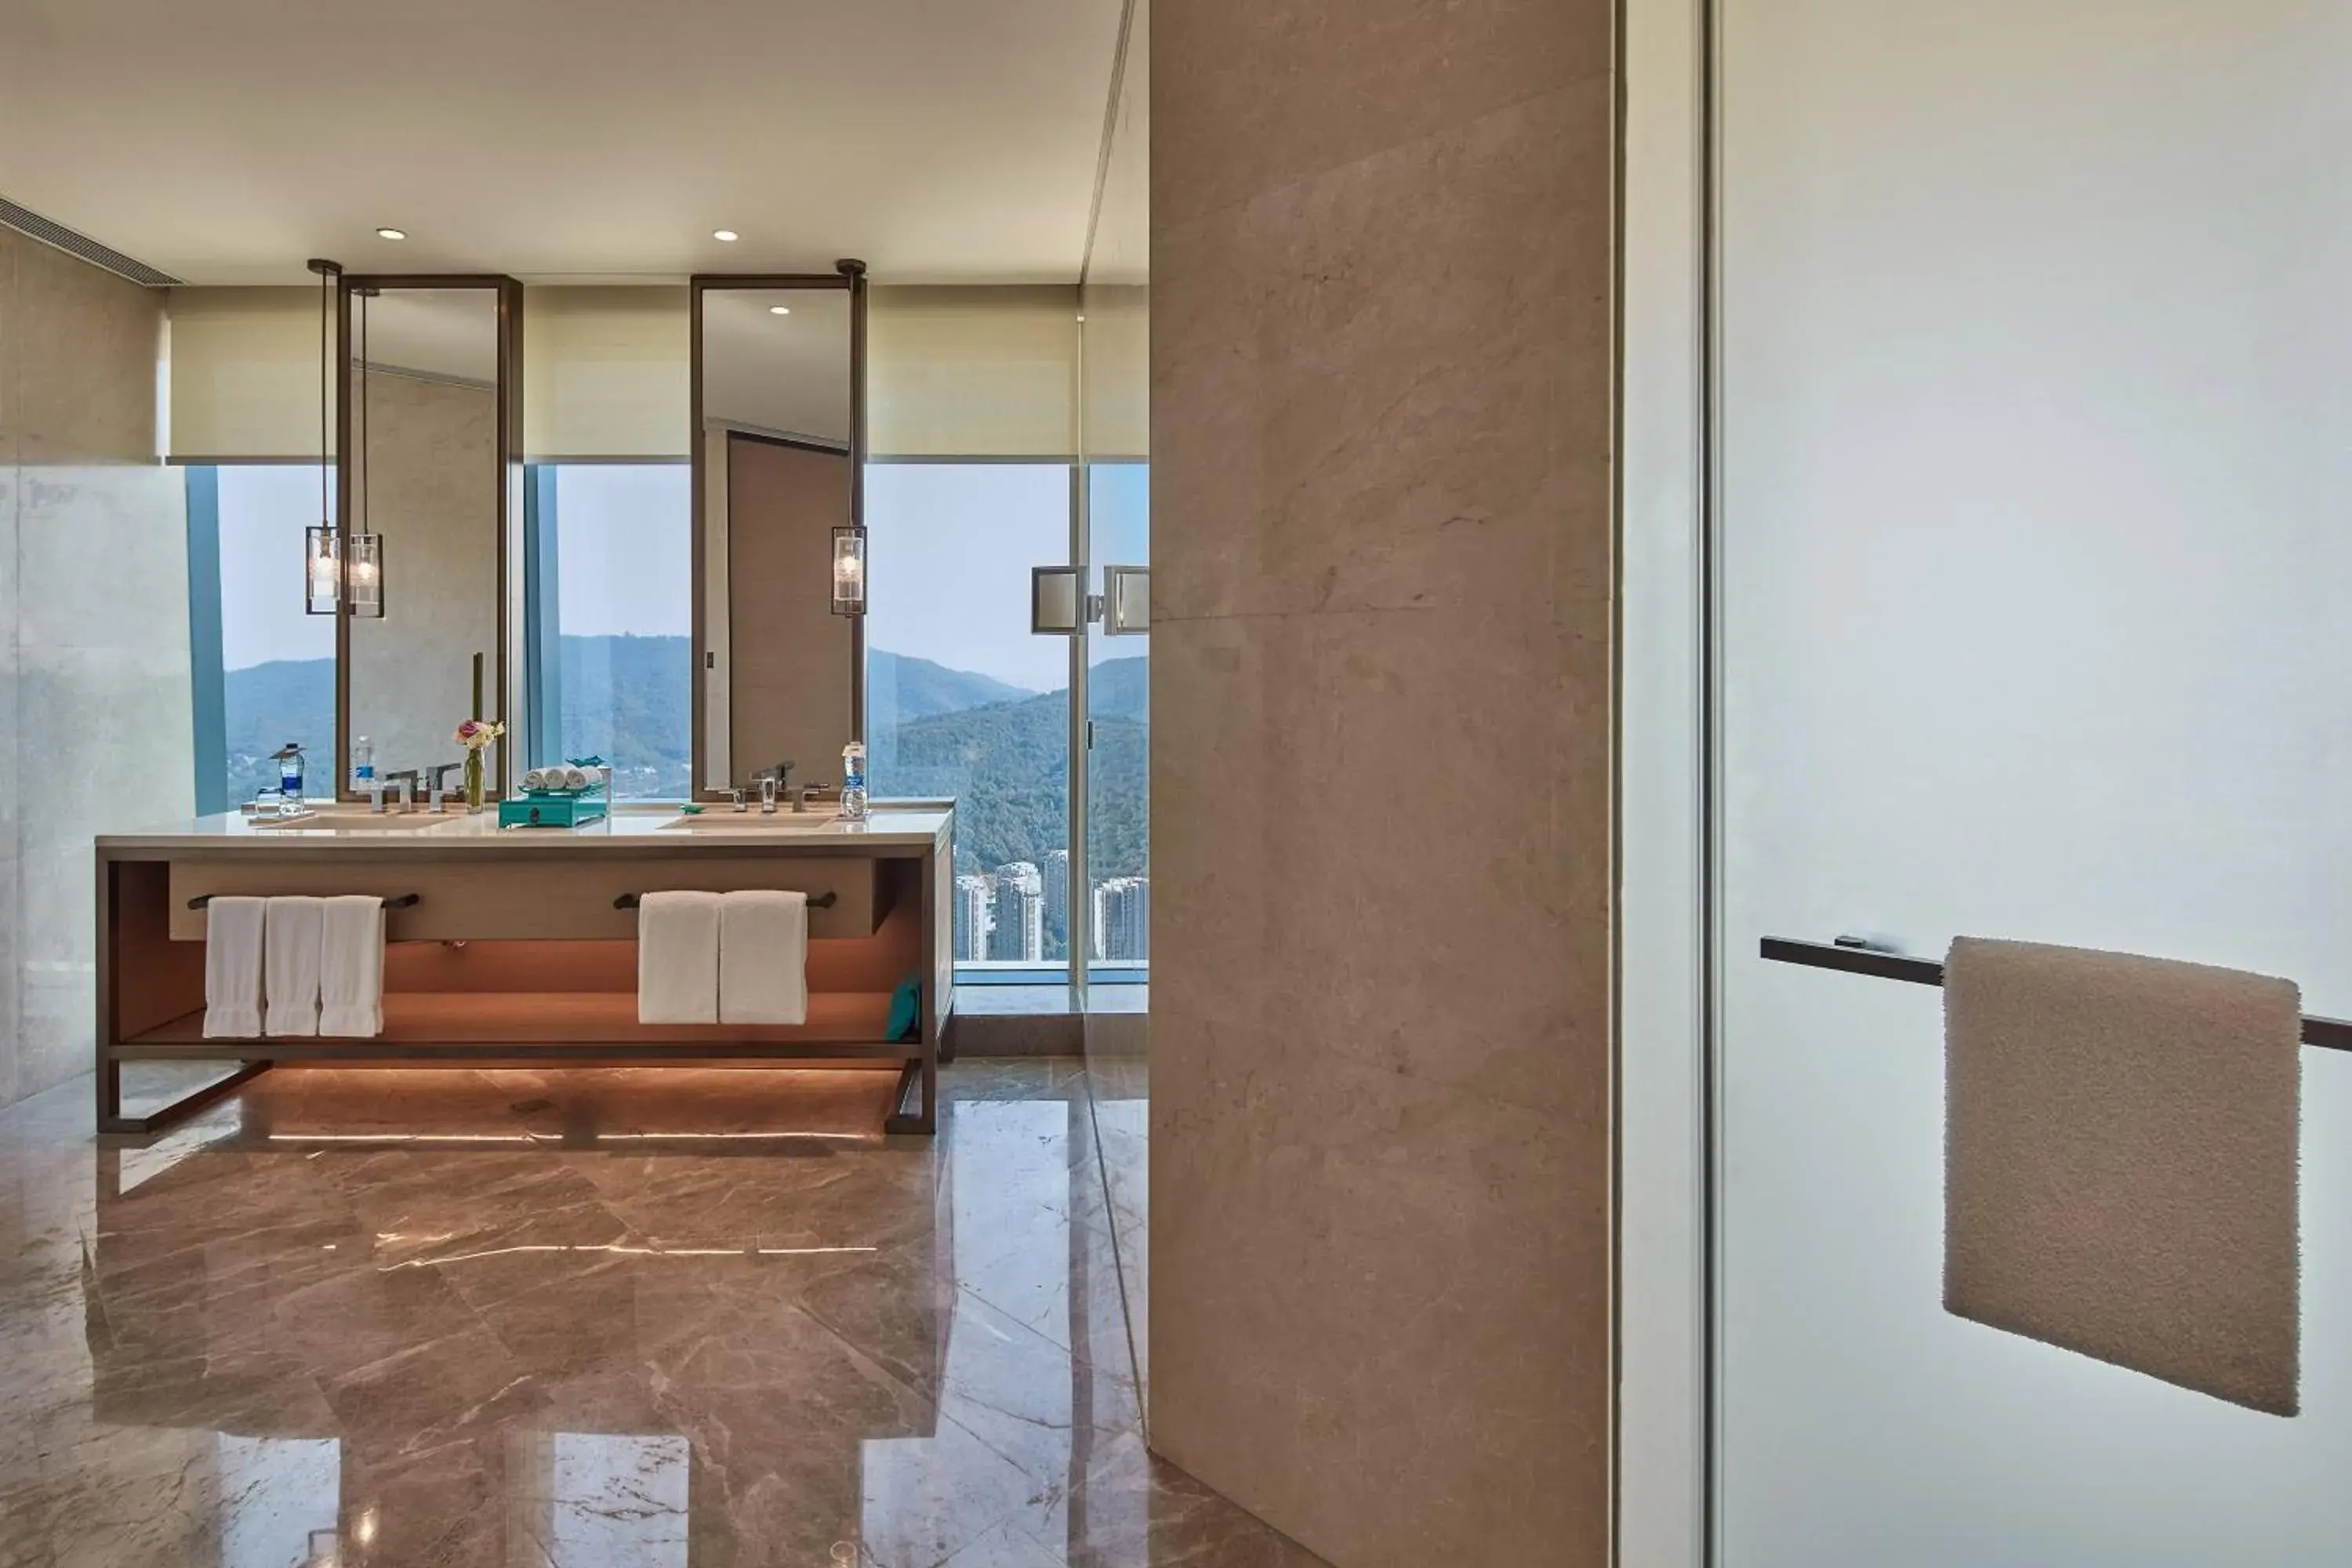 Bathroom in Meixi Lake Hotel, a Luxury Collection Hotel, Changsha